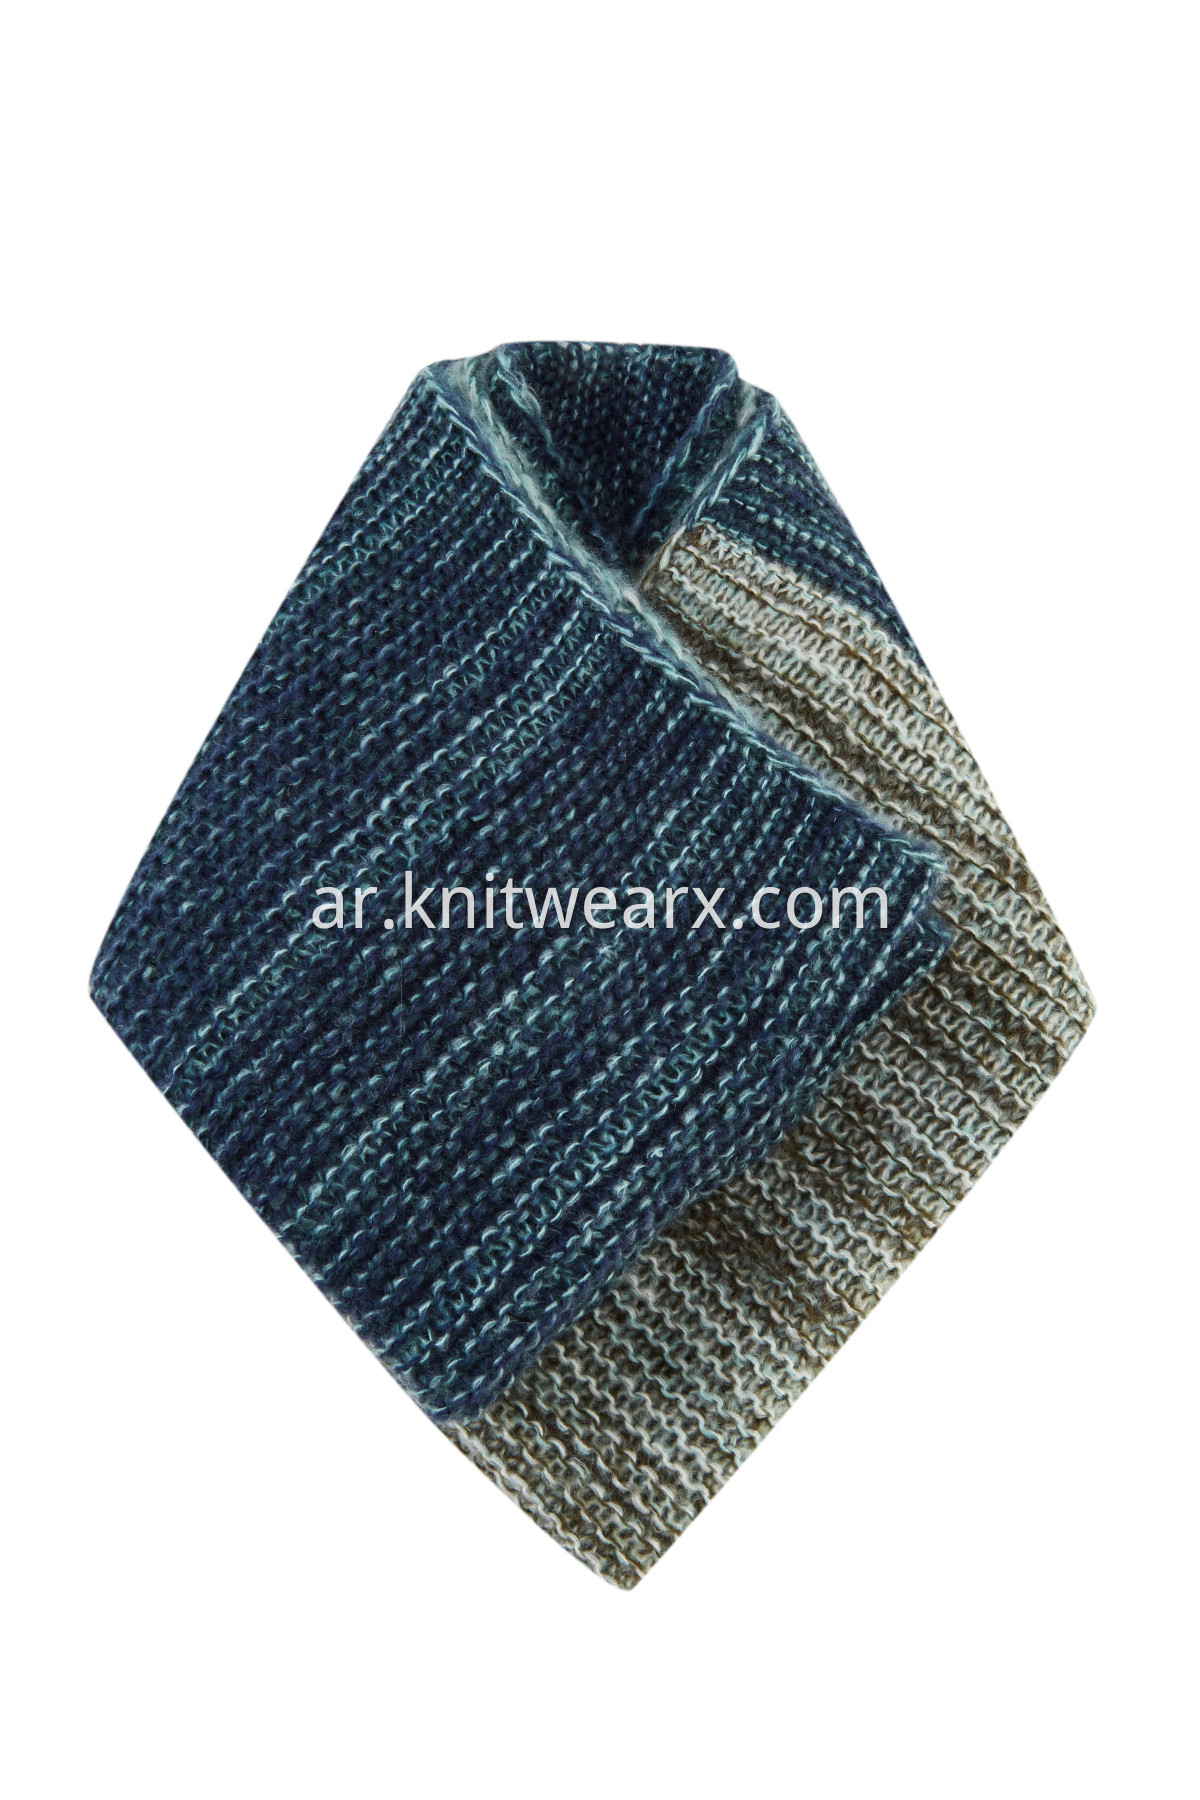 Women's Winter Scarf Wrapables Knitted Warm Soft Neck